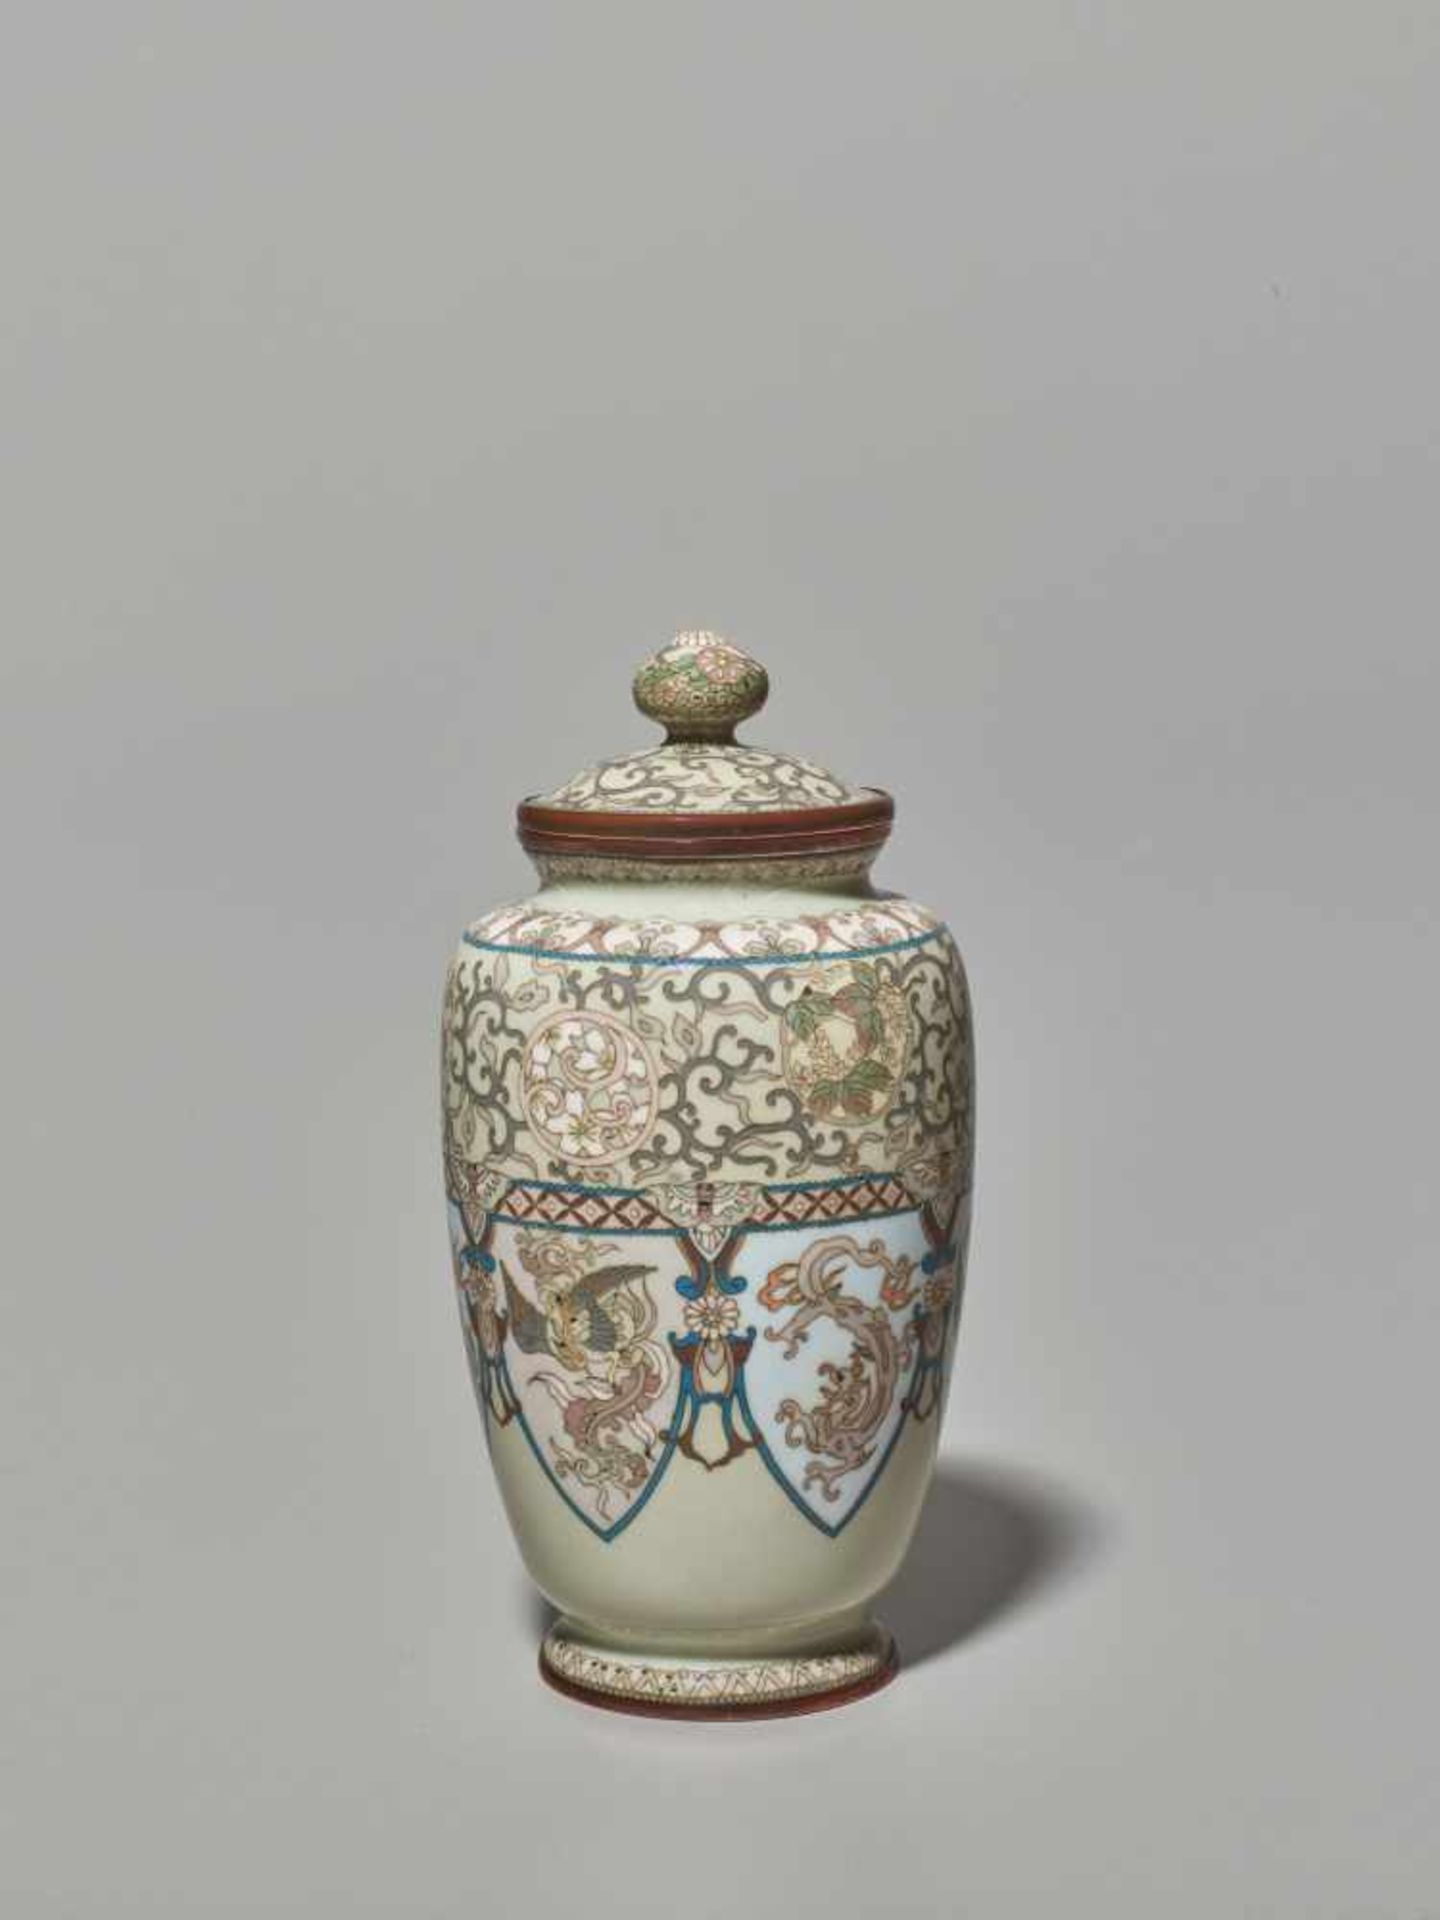 A JAPANESE CLOISONNÉ LIDDED VASE WITH A DESIGN OF PHOENIXES AND DRAGONSCloisonné with colored